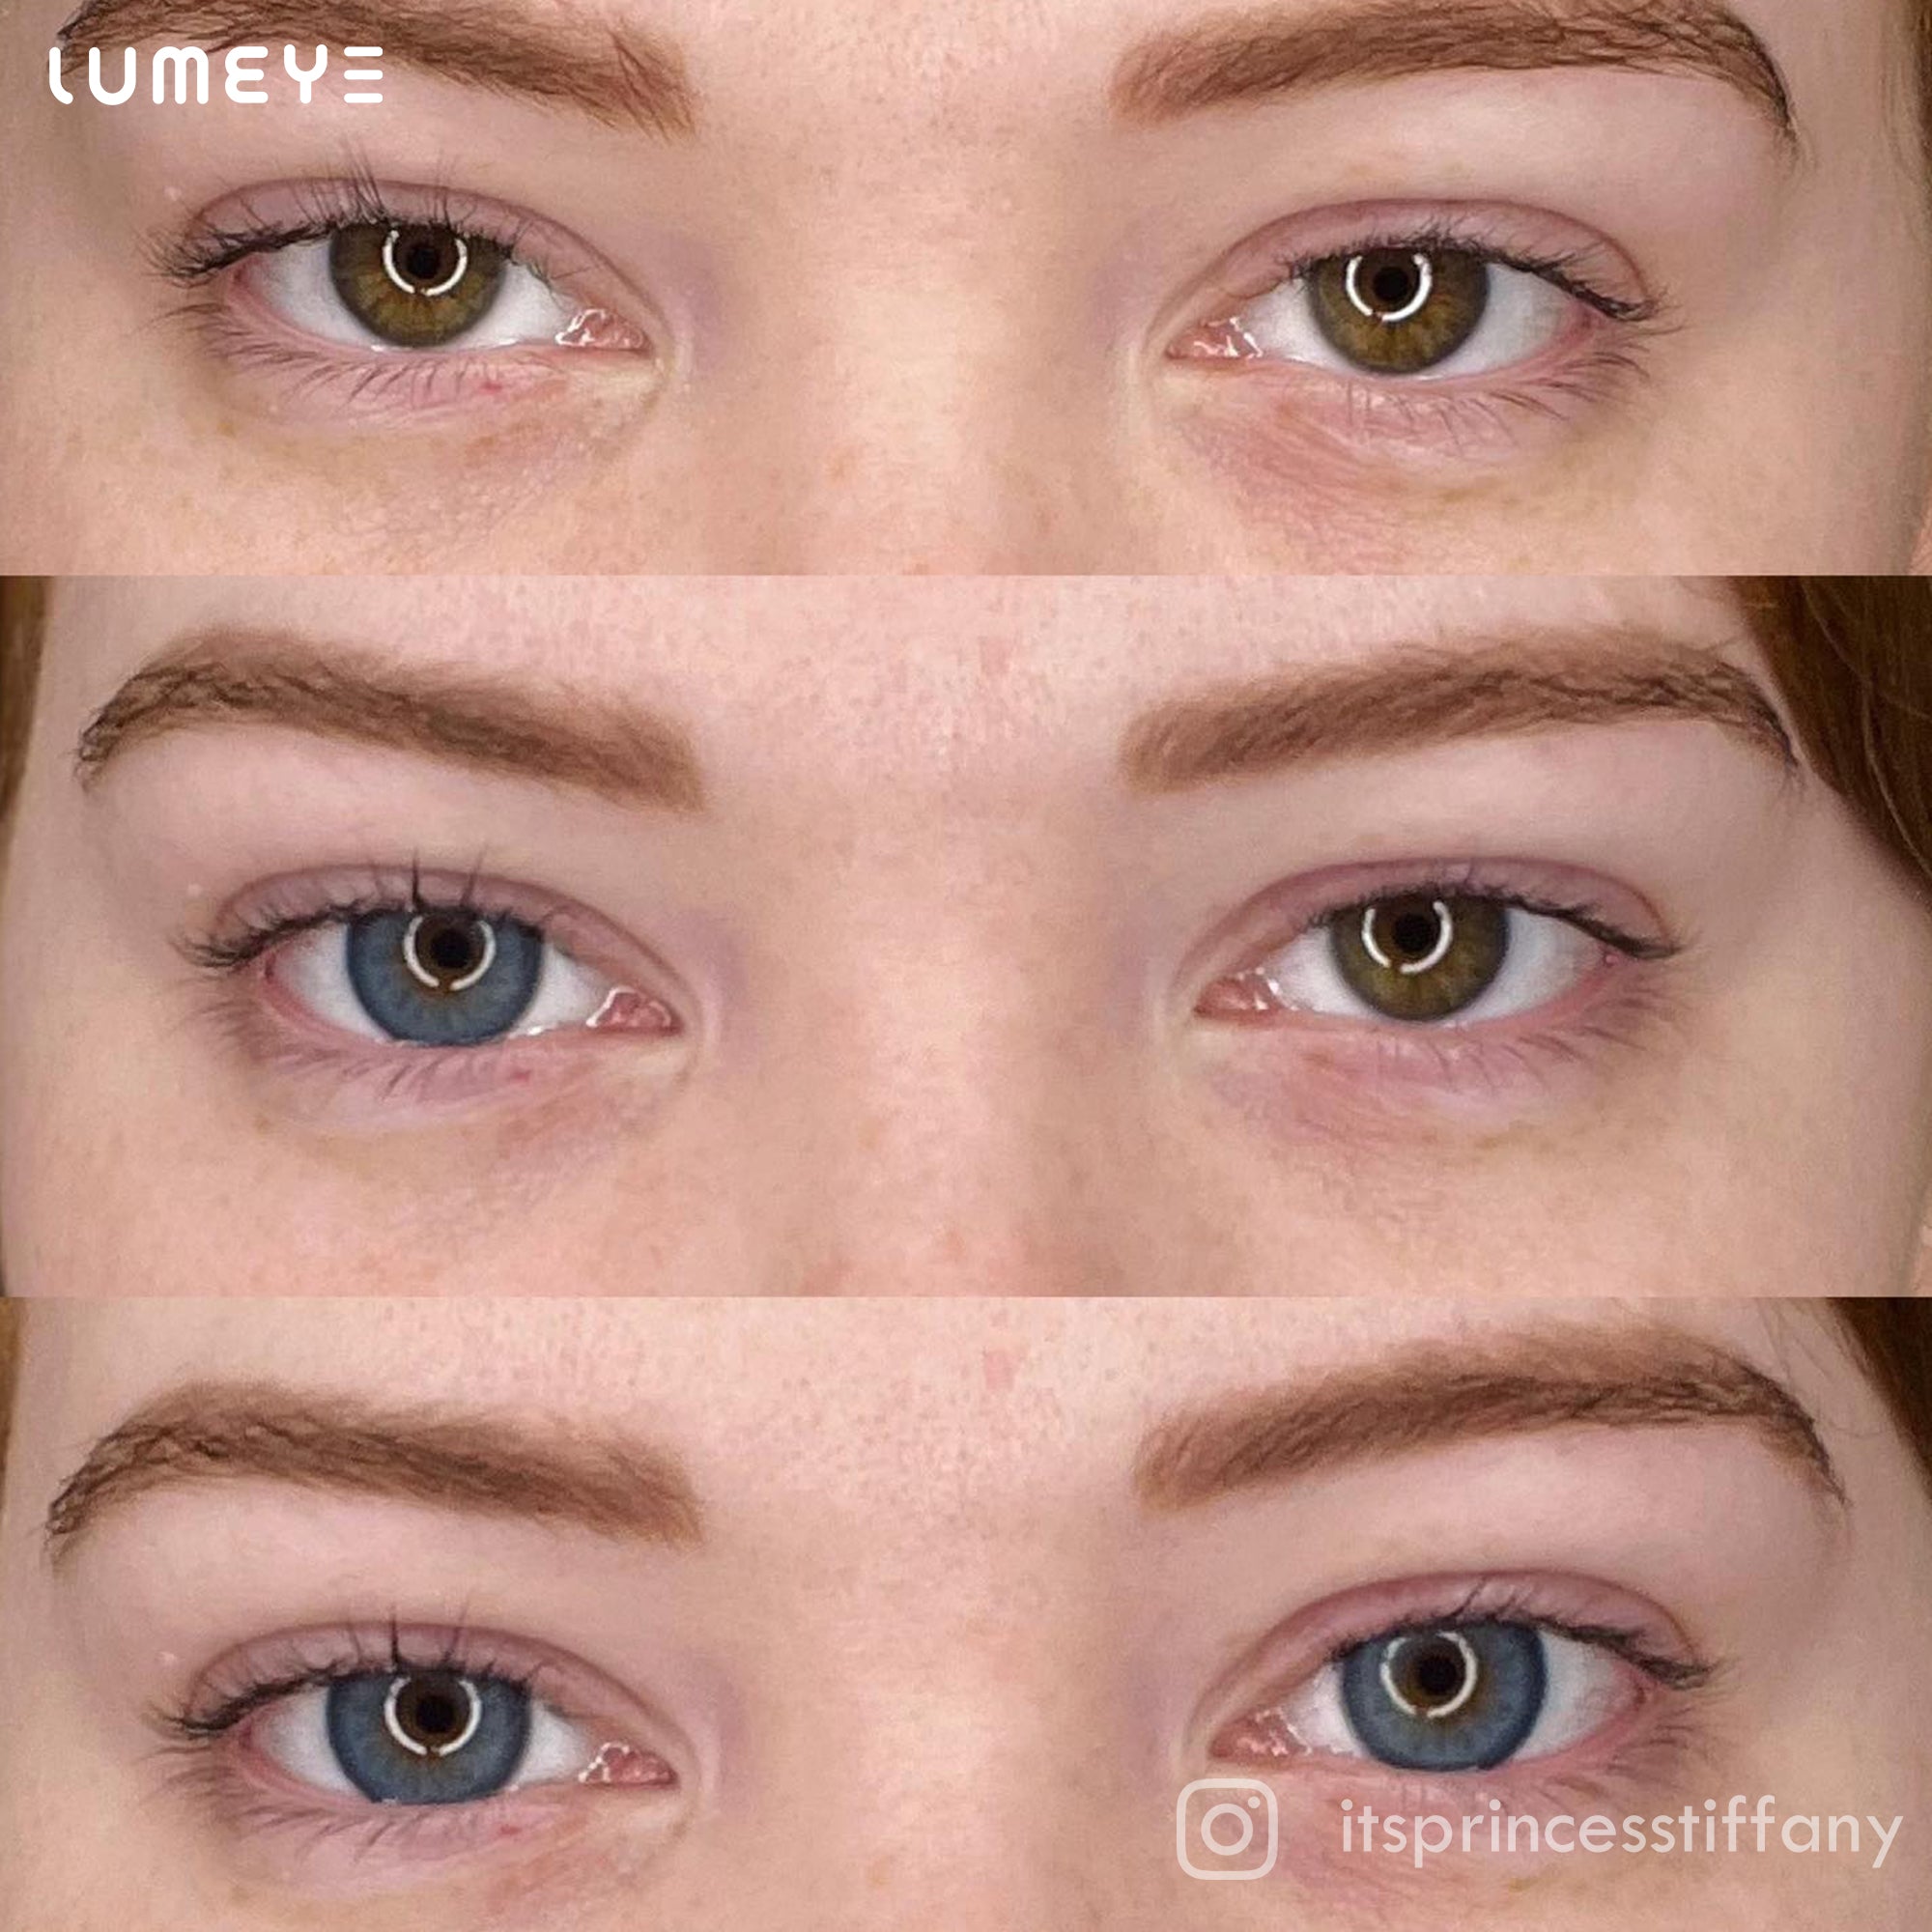 Best COLORED CONTACTS - LUMEYE Daisy Blue Colored Contact Lenses - LUMEYE